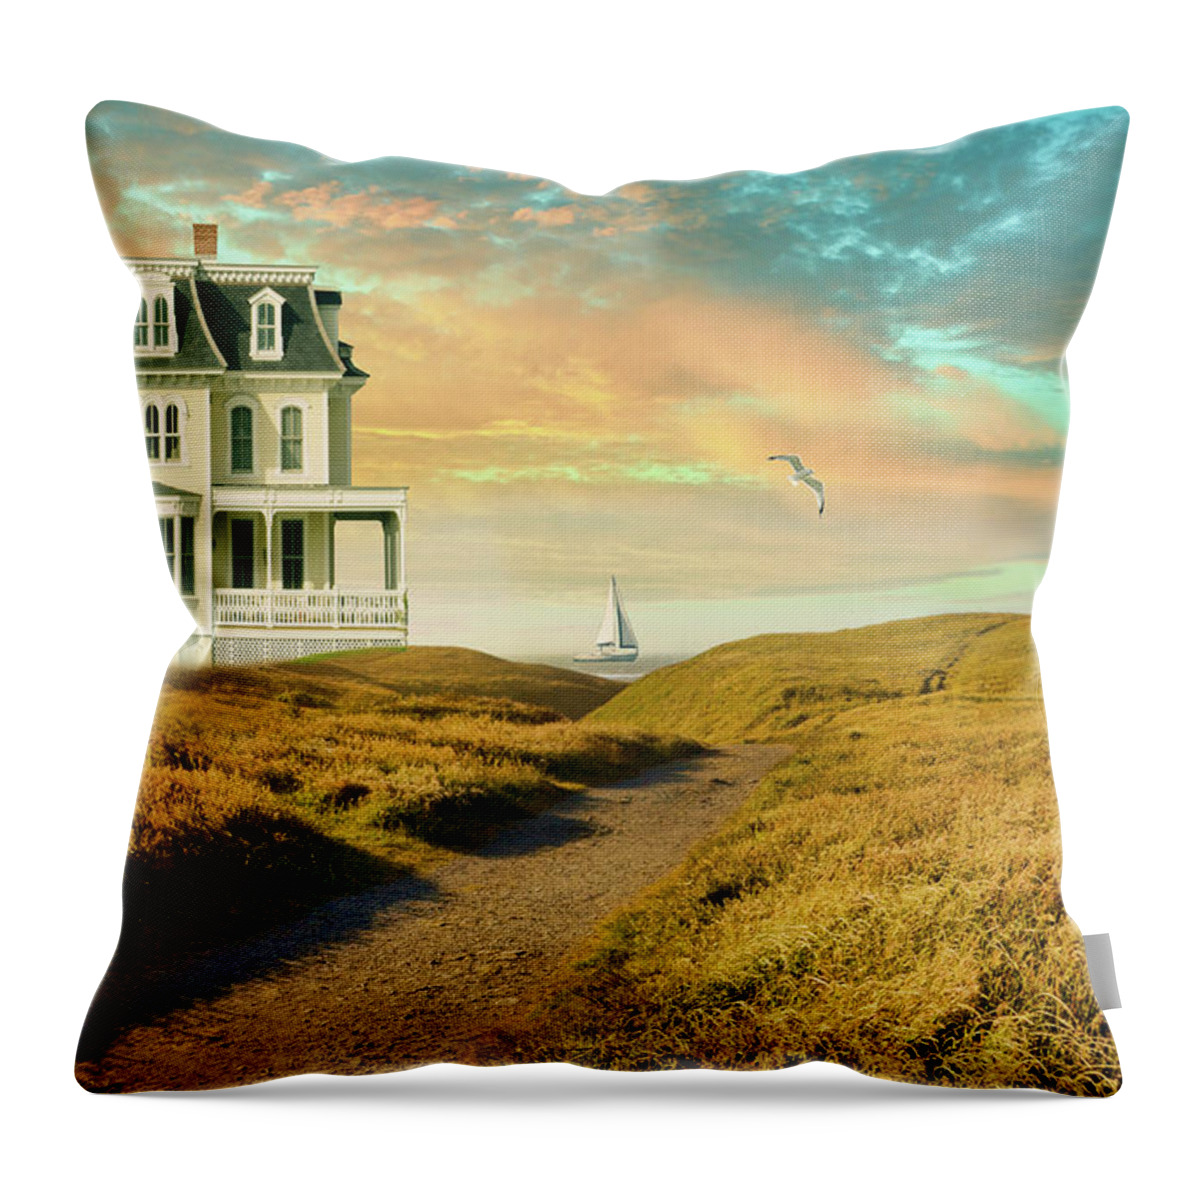 House Throw Pillow featuring the photograph Elegant House by the Sea by Jill Battaglia